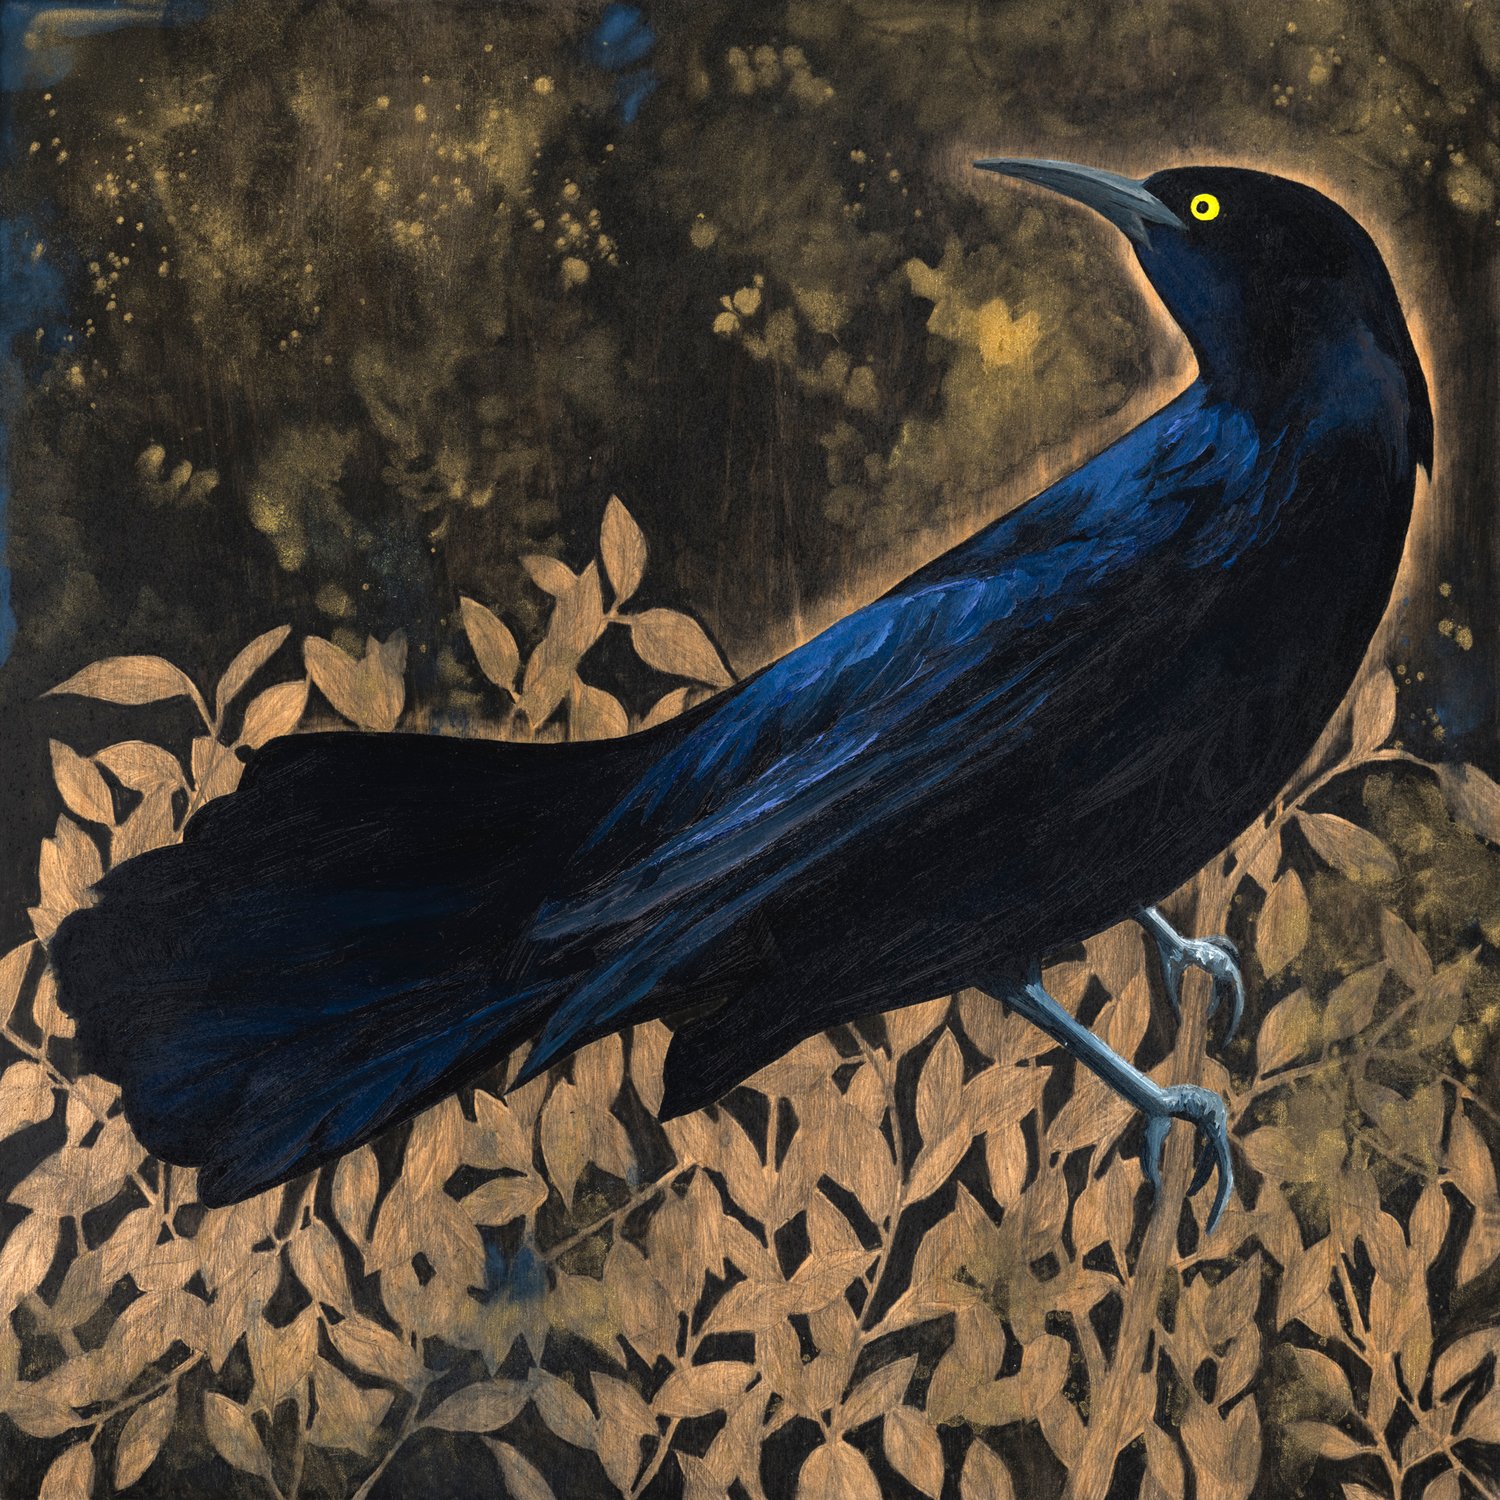 Eclipse Grackle #39 by Carly Weaver - Original Painting